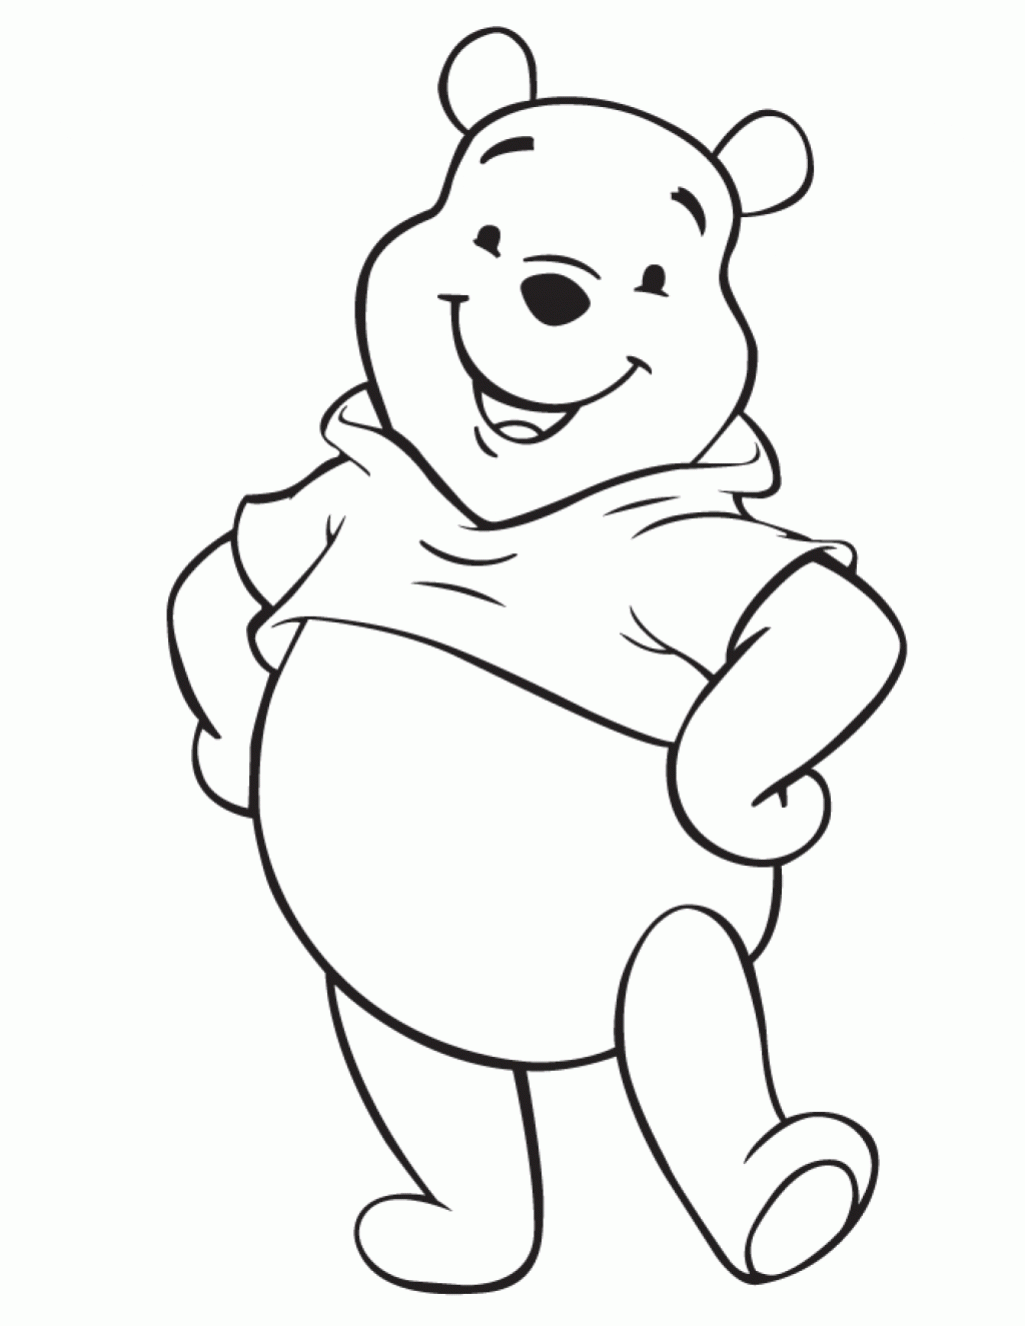 Free Cute Cartoon Characters Coloring Pages, Download Free Cute Cartoon  Characters Coloring Pages png images, Free ClipArts on Clipart Library